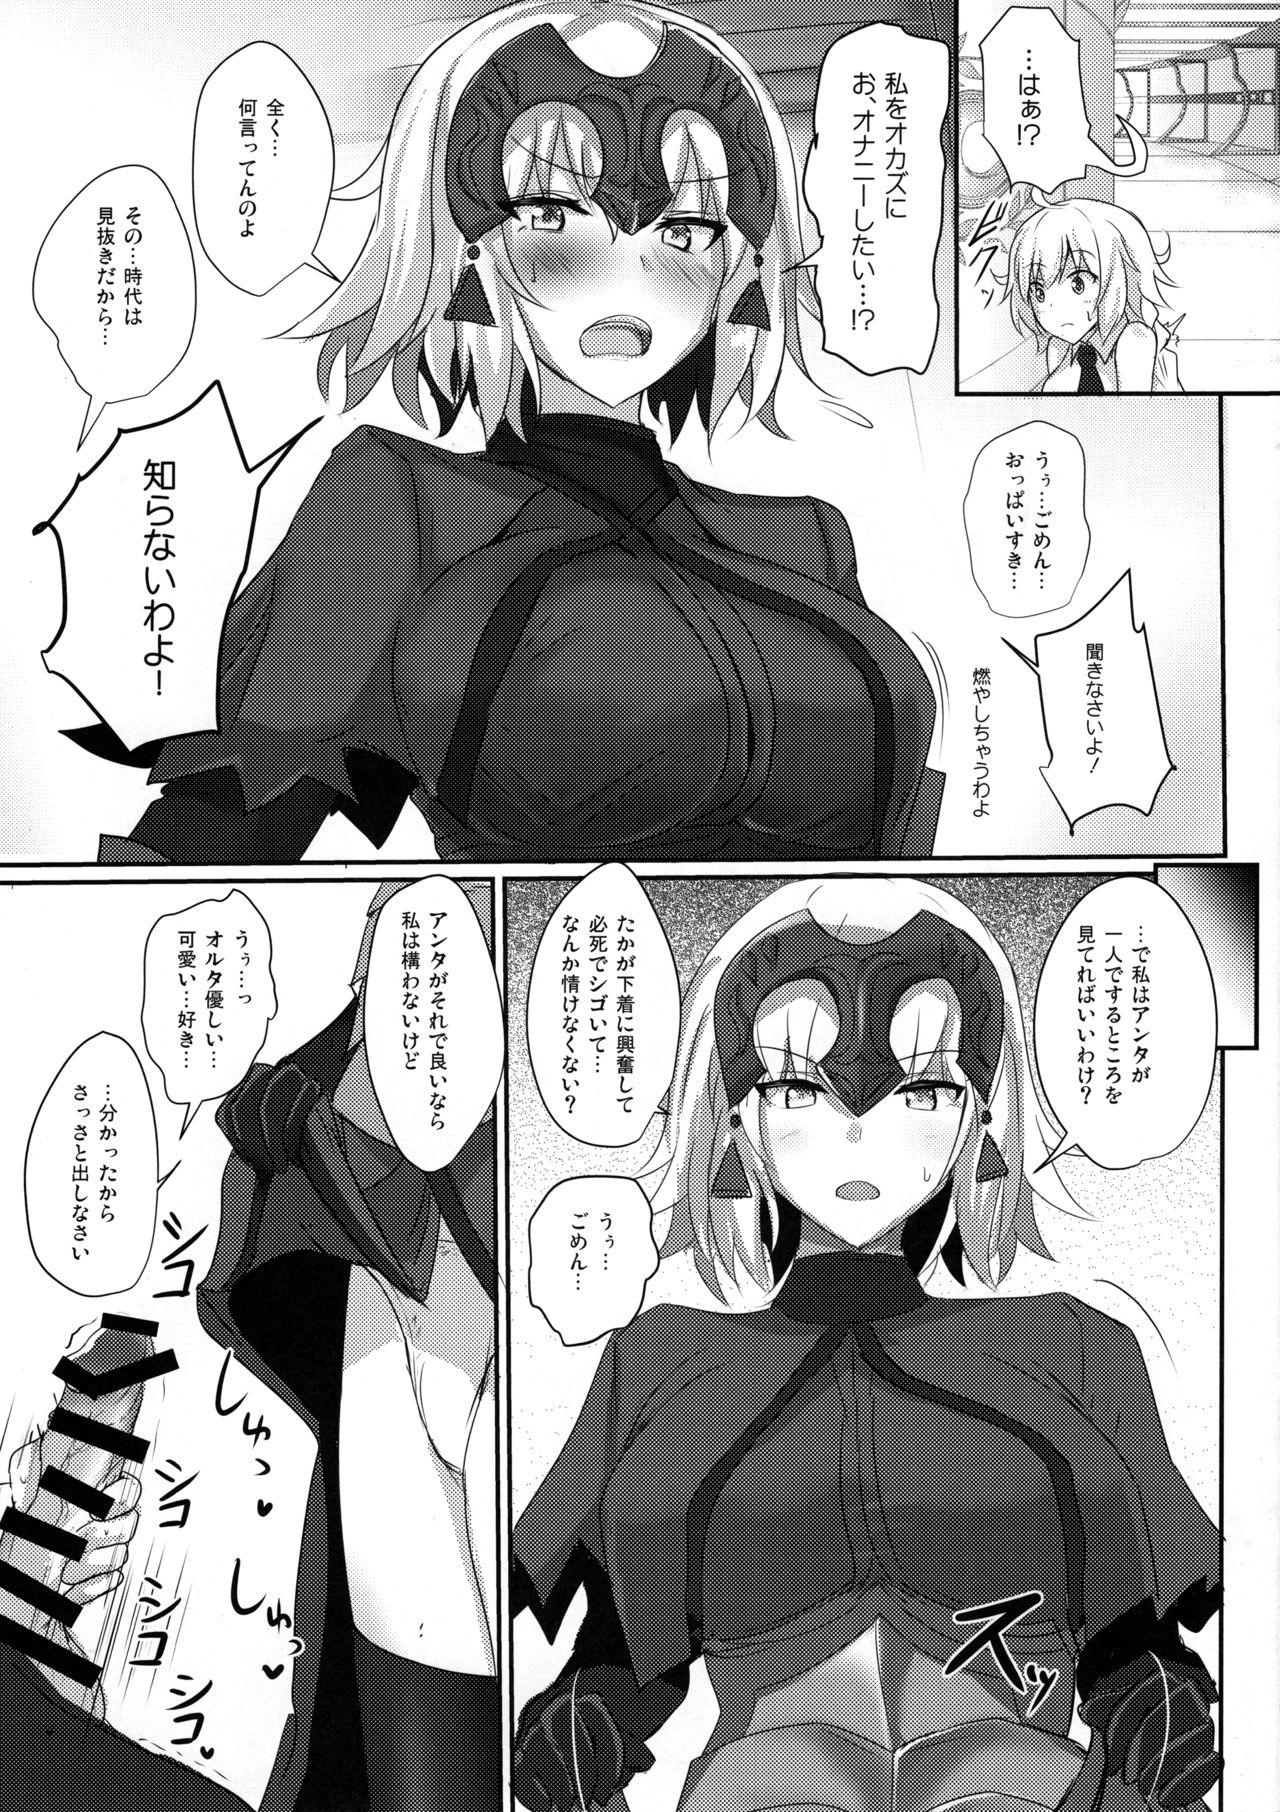 Wet Cunt Okazu wa Alter-chan - Fate grand order Officesex - Page 4